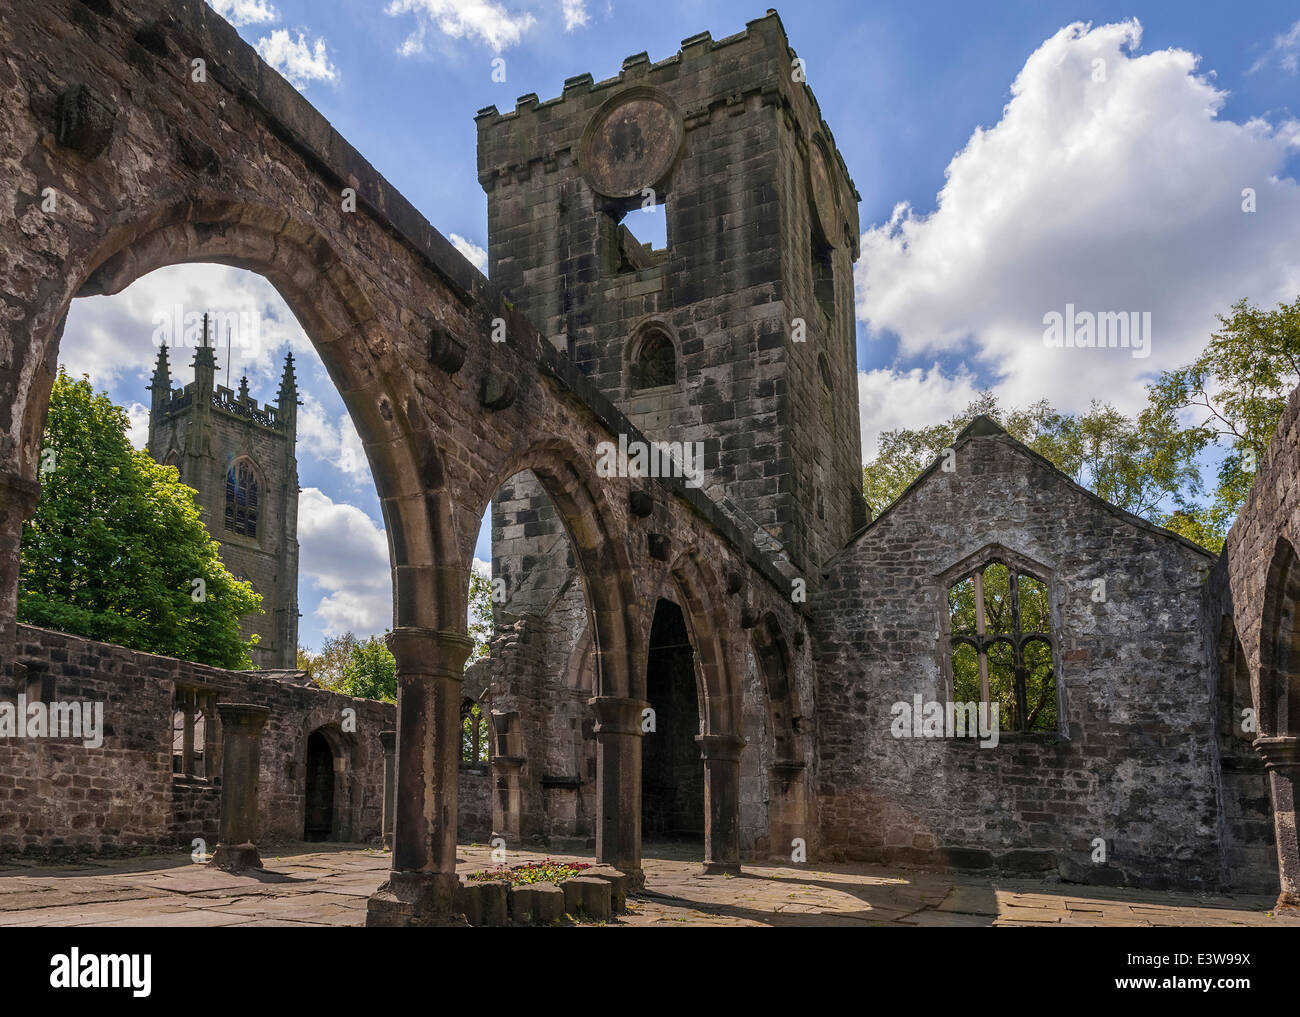 Heptonstall village Calderdale. West Yorkshire. North West England. Saint Thomas a Becket ruined church the later church behind. Stock Photo